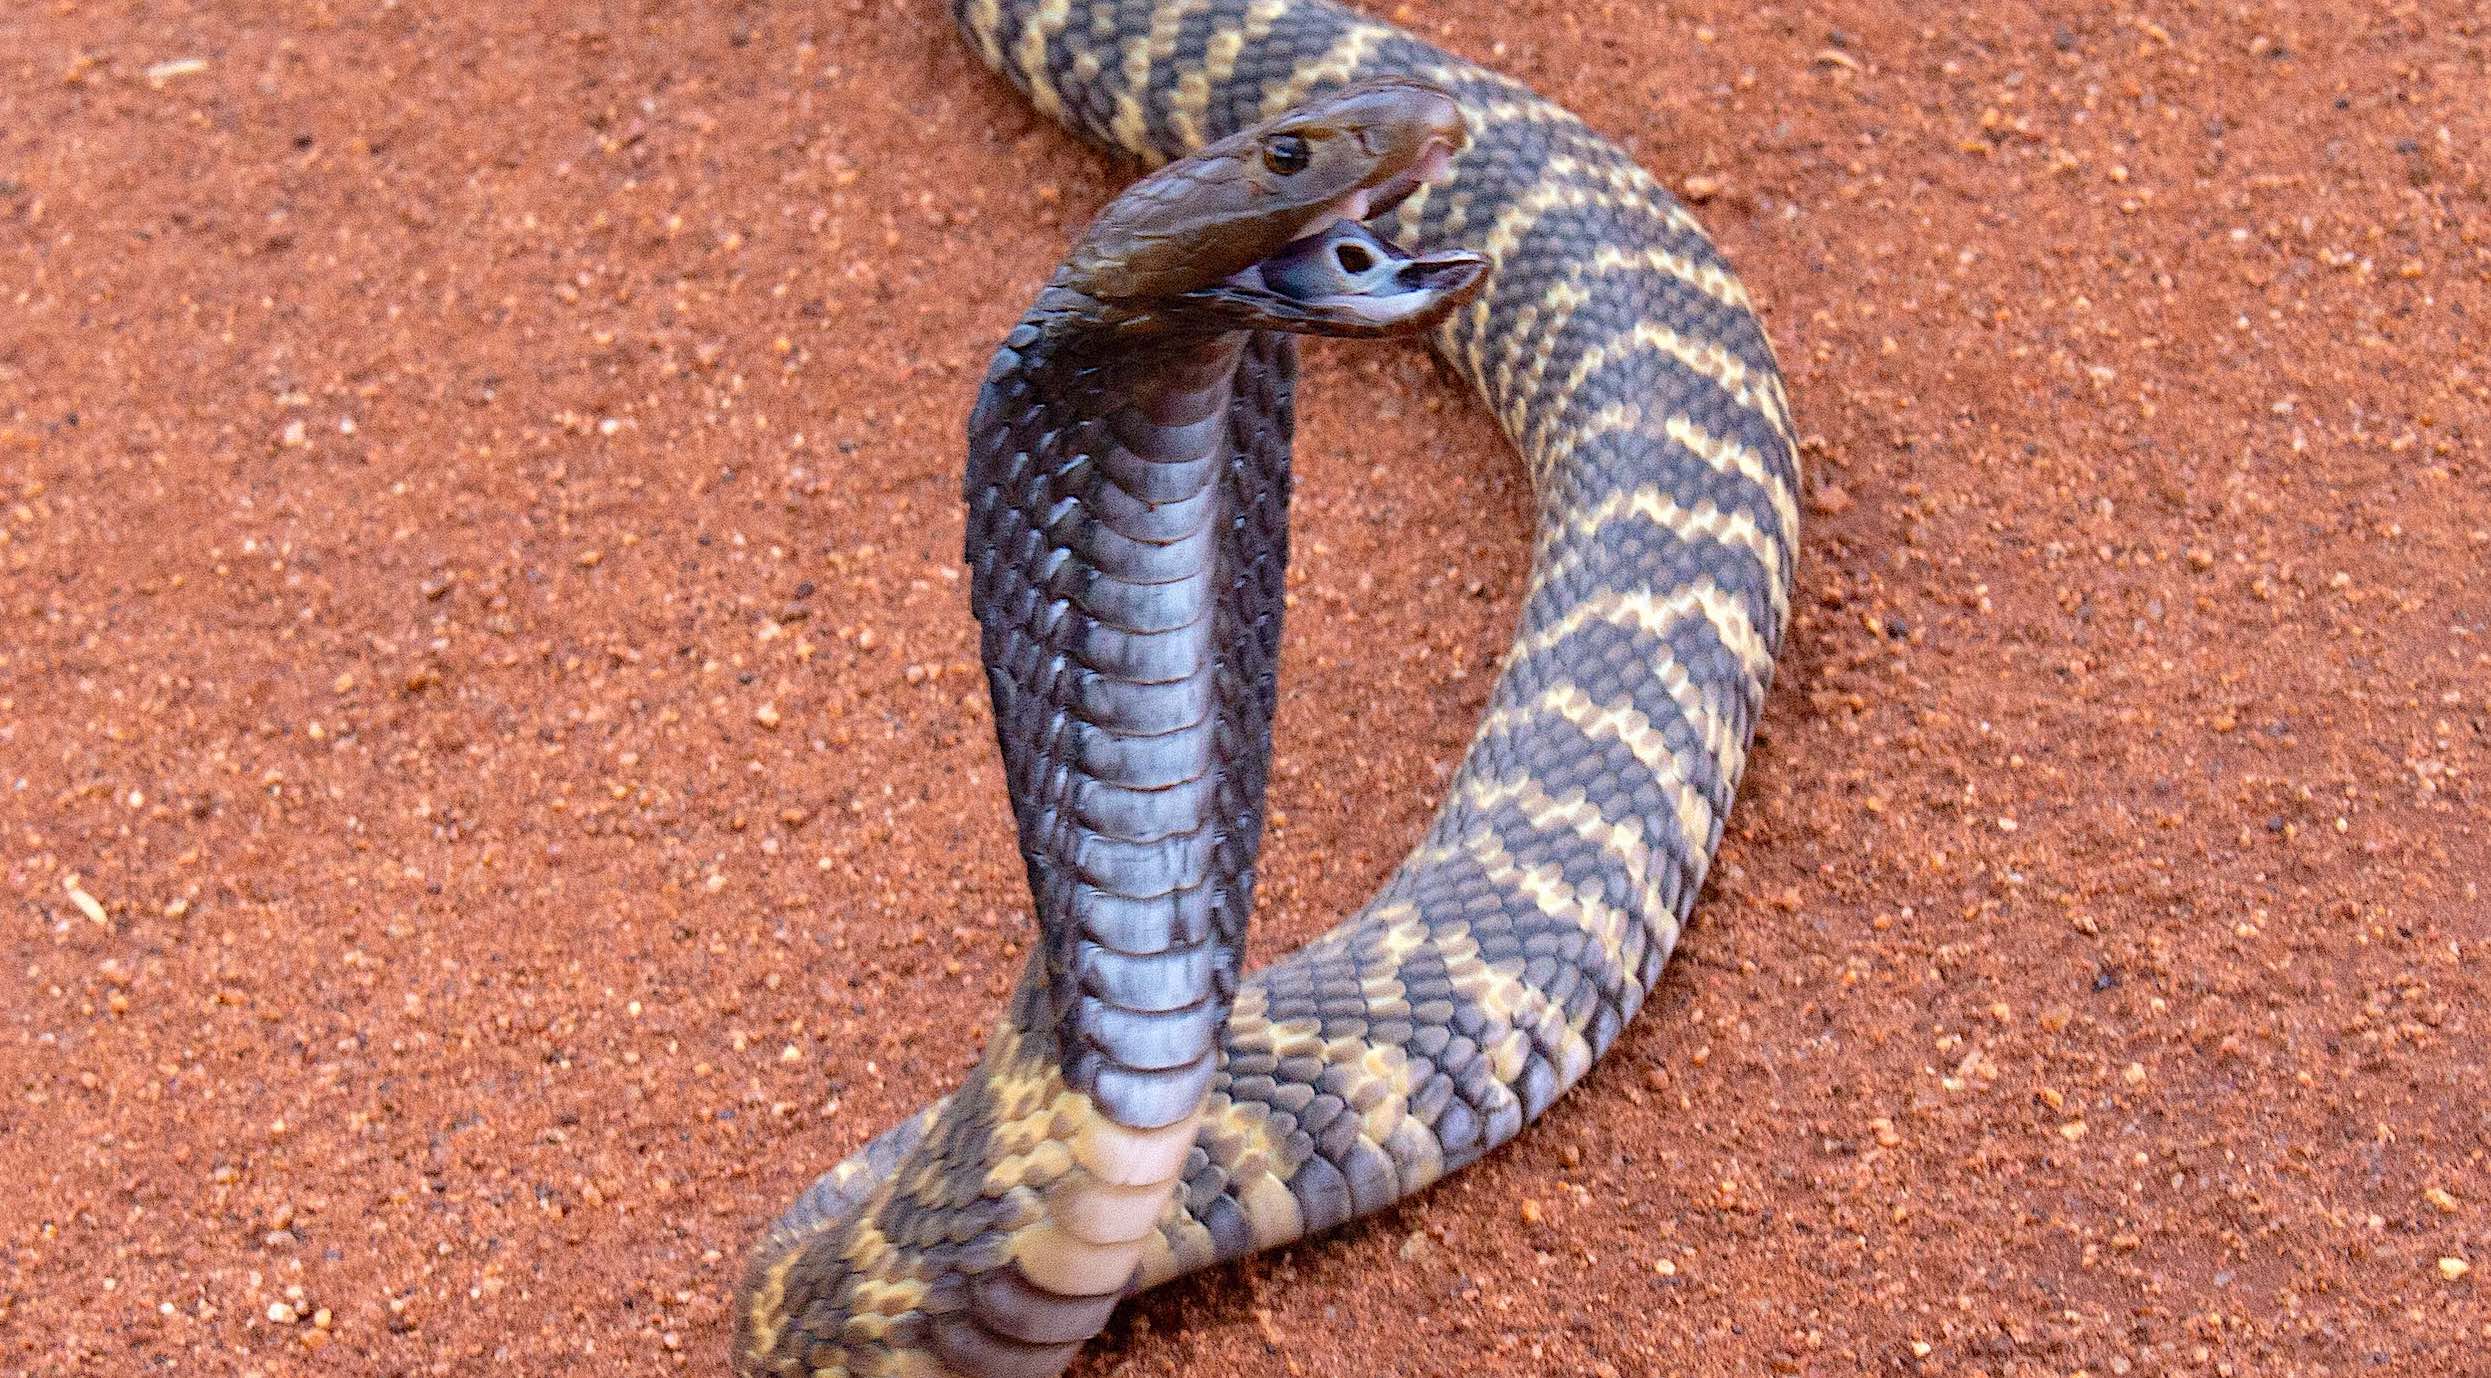 A western barred spitting cobra, also known as a Zebra Snake.